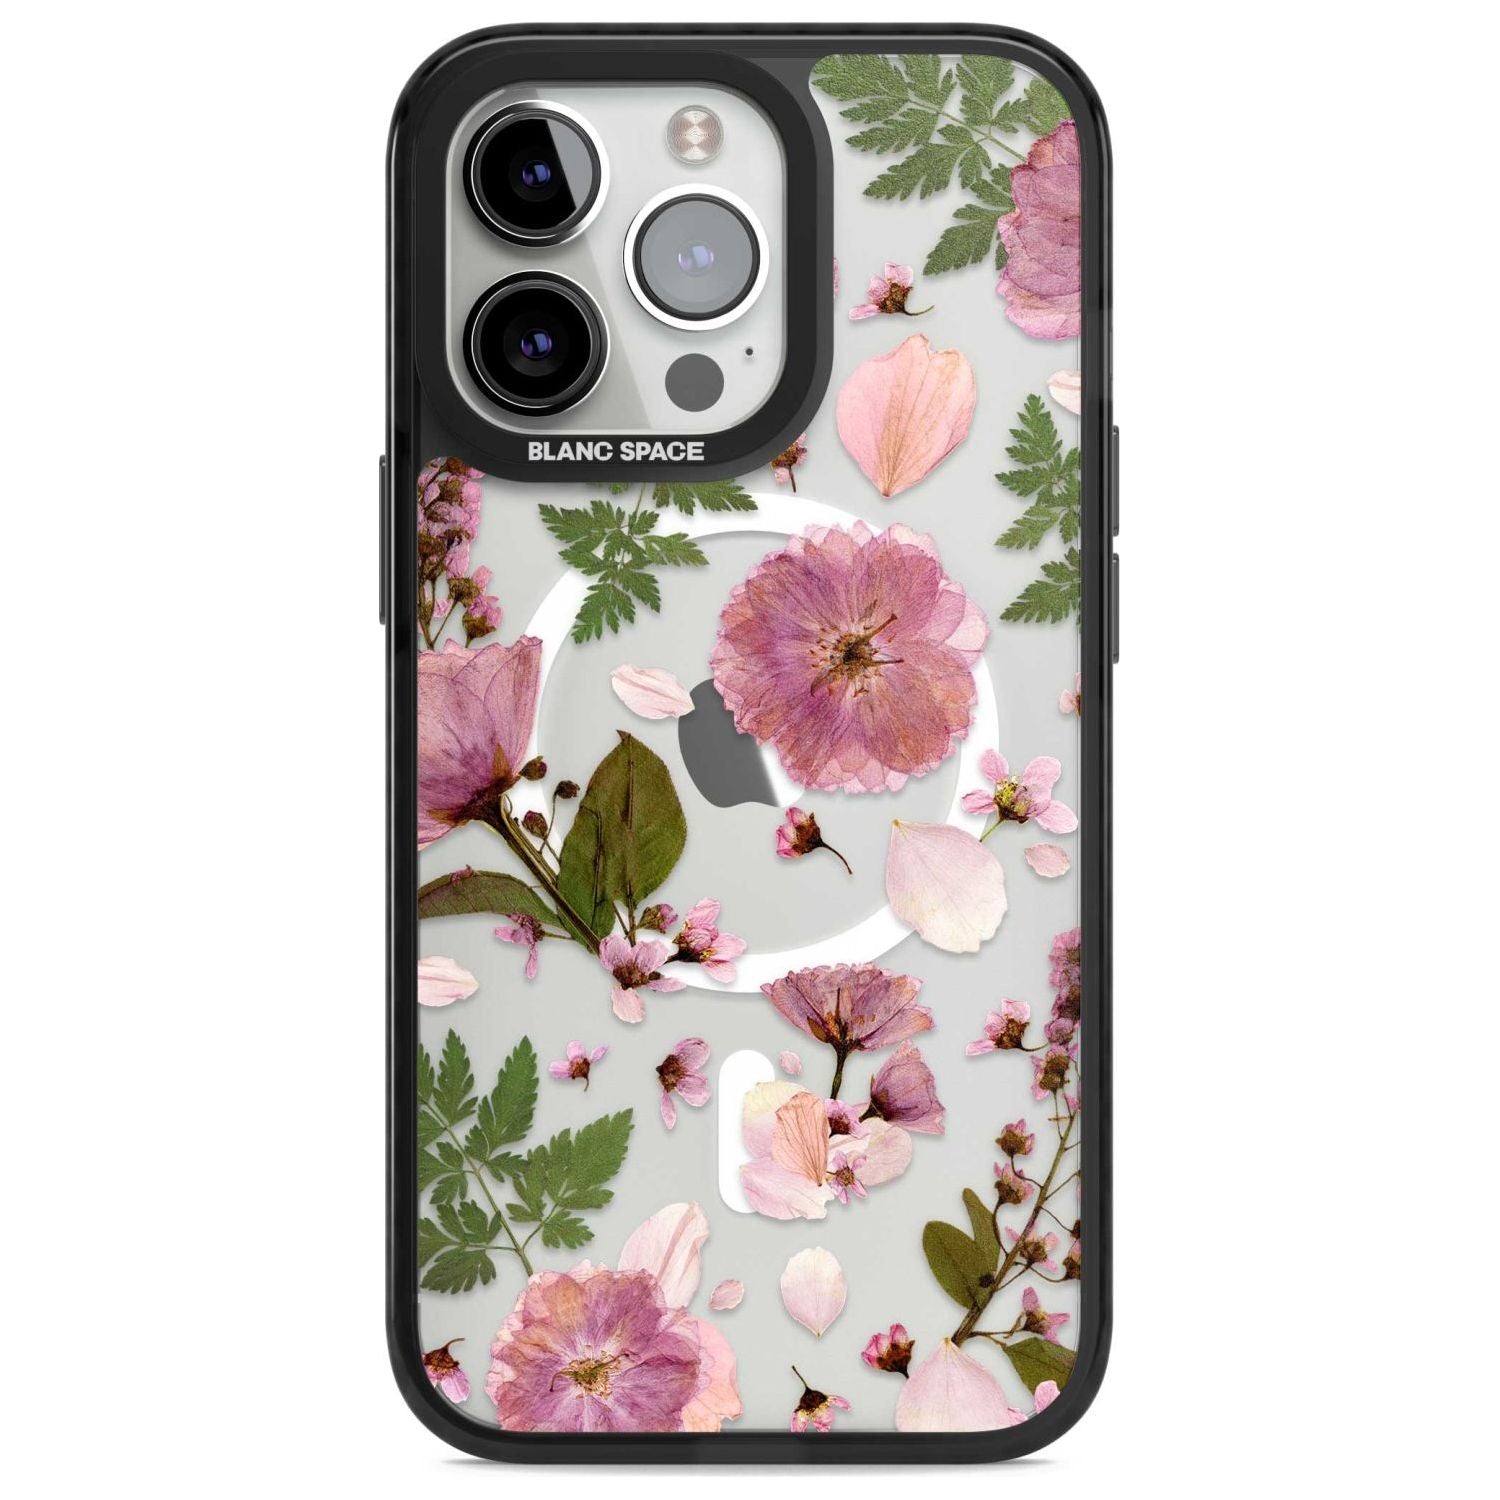 Natural Arrangement of Flowers & Leaves Design Phone Case iPhone 15 Pro Max / Magsafe Black Impact Case,iPhone 15 Pro / Magsafe Black Impact Case,iPhone 14 Pro Max / Magsafe Black Impact Case,iPhone 14 Pro / Magsafe Black Impact Case,iPhone 13 Pro / Magsafe Black Impact Case Blanc Space